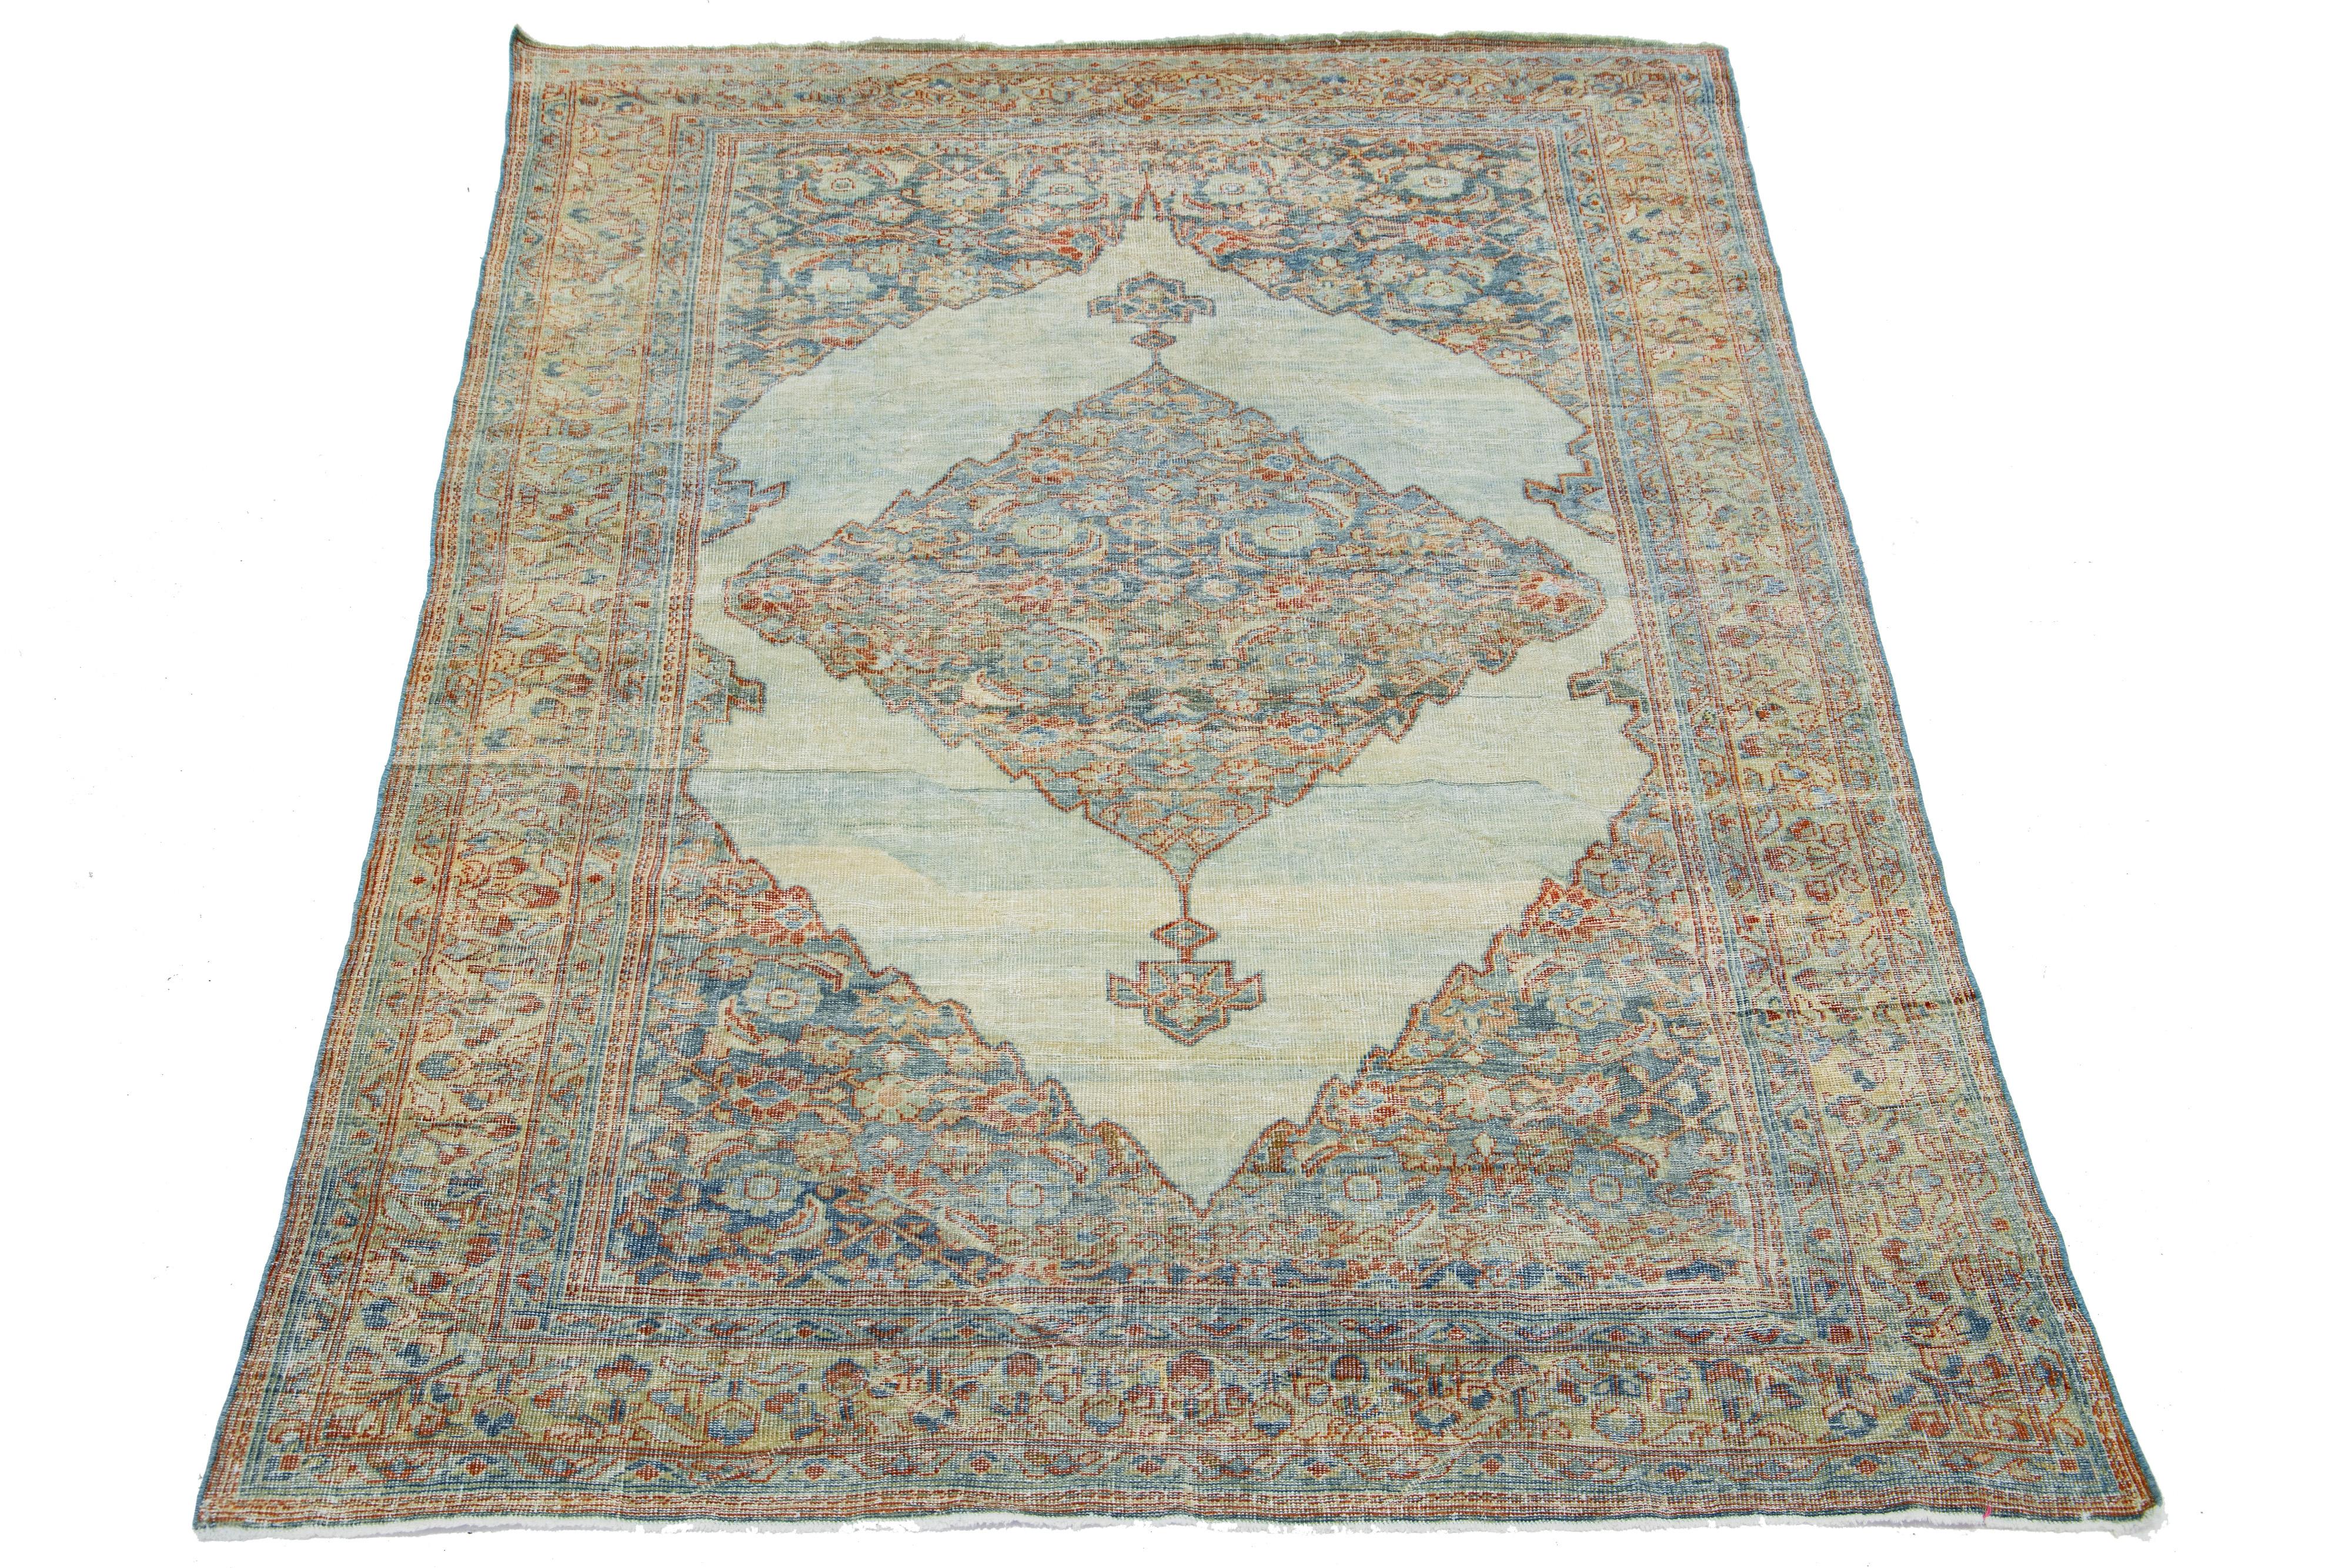 Beautiful antique Persian Mahal hand-knotted wool rug with a blue field. This piece has a beige-designed frame with red accents in a gorgeous all-over floral design.

This rug measures 5'9